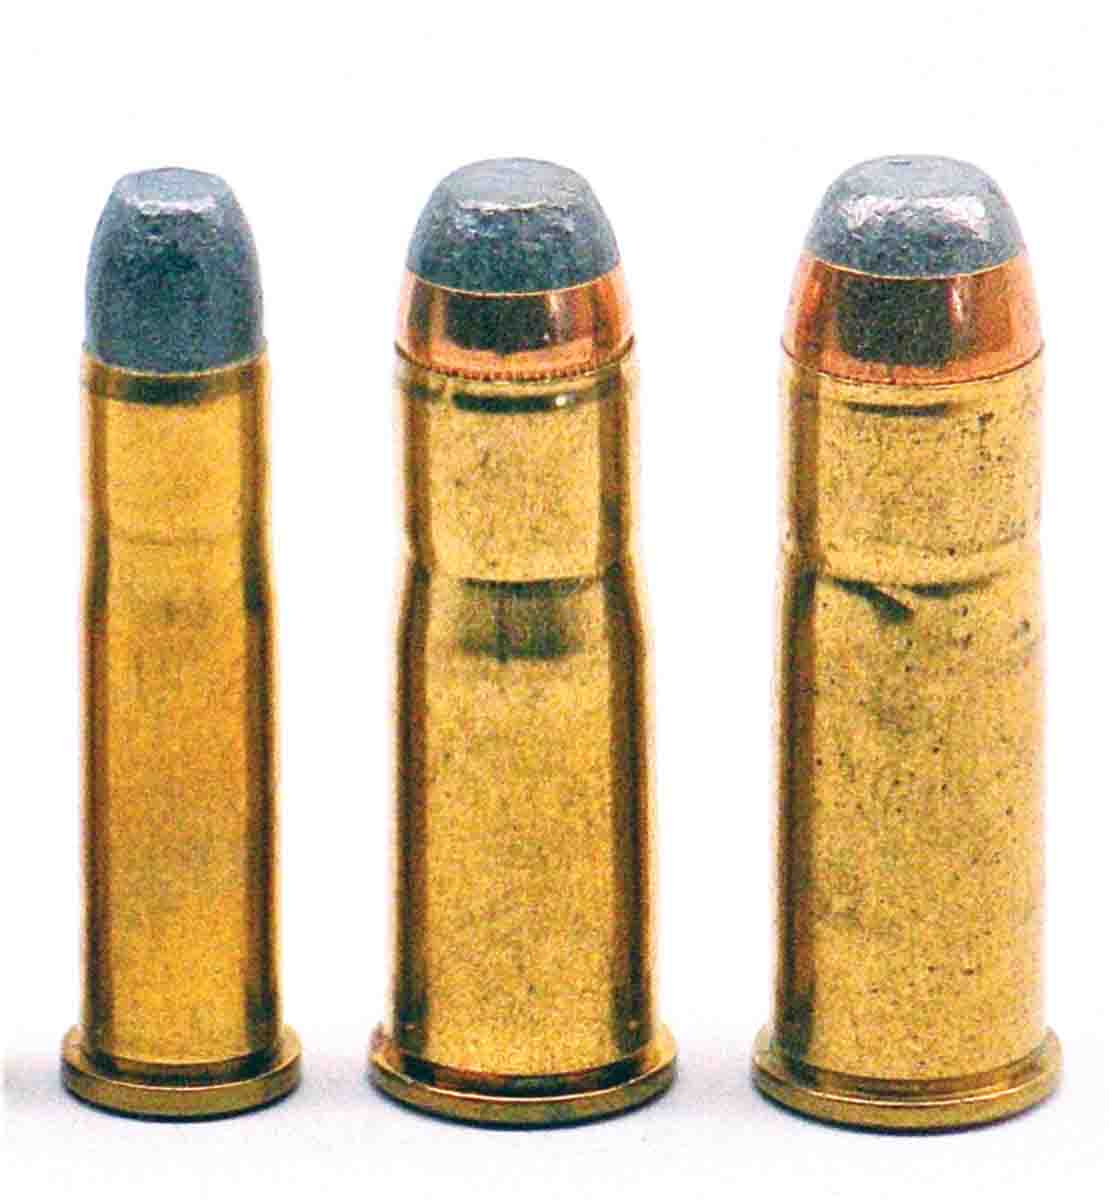 The M73 was first chambered for .44 WCF (right) followed by .38 (center) and .32 WCF (left) in 1879 and 1882, respectively.